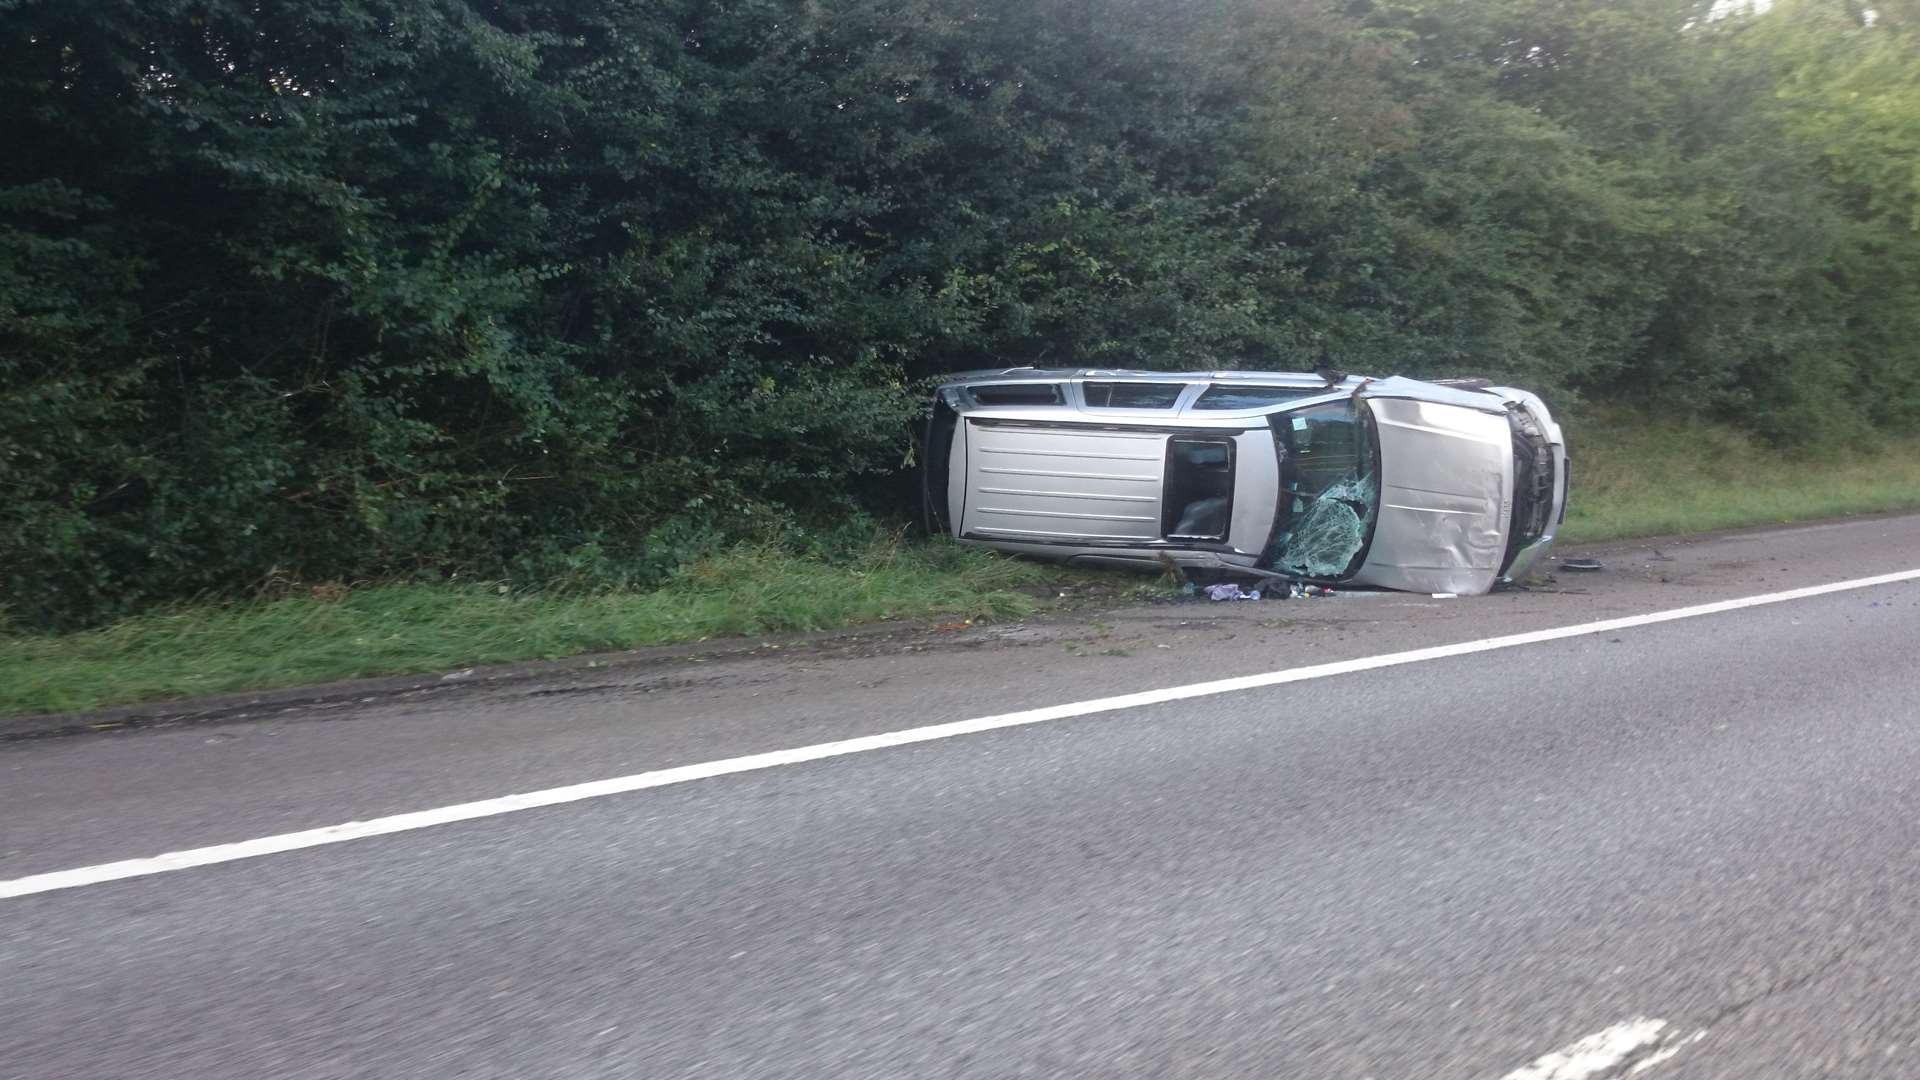 The overturned car on the M2.